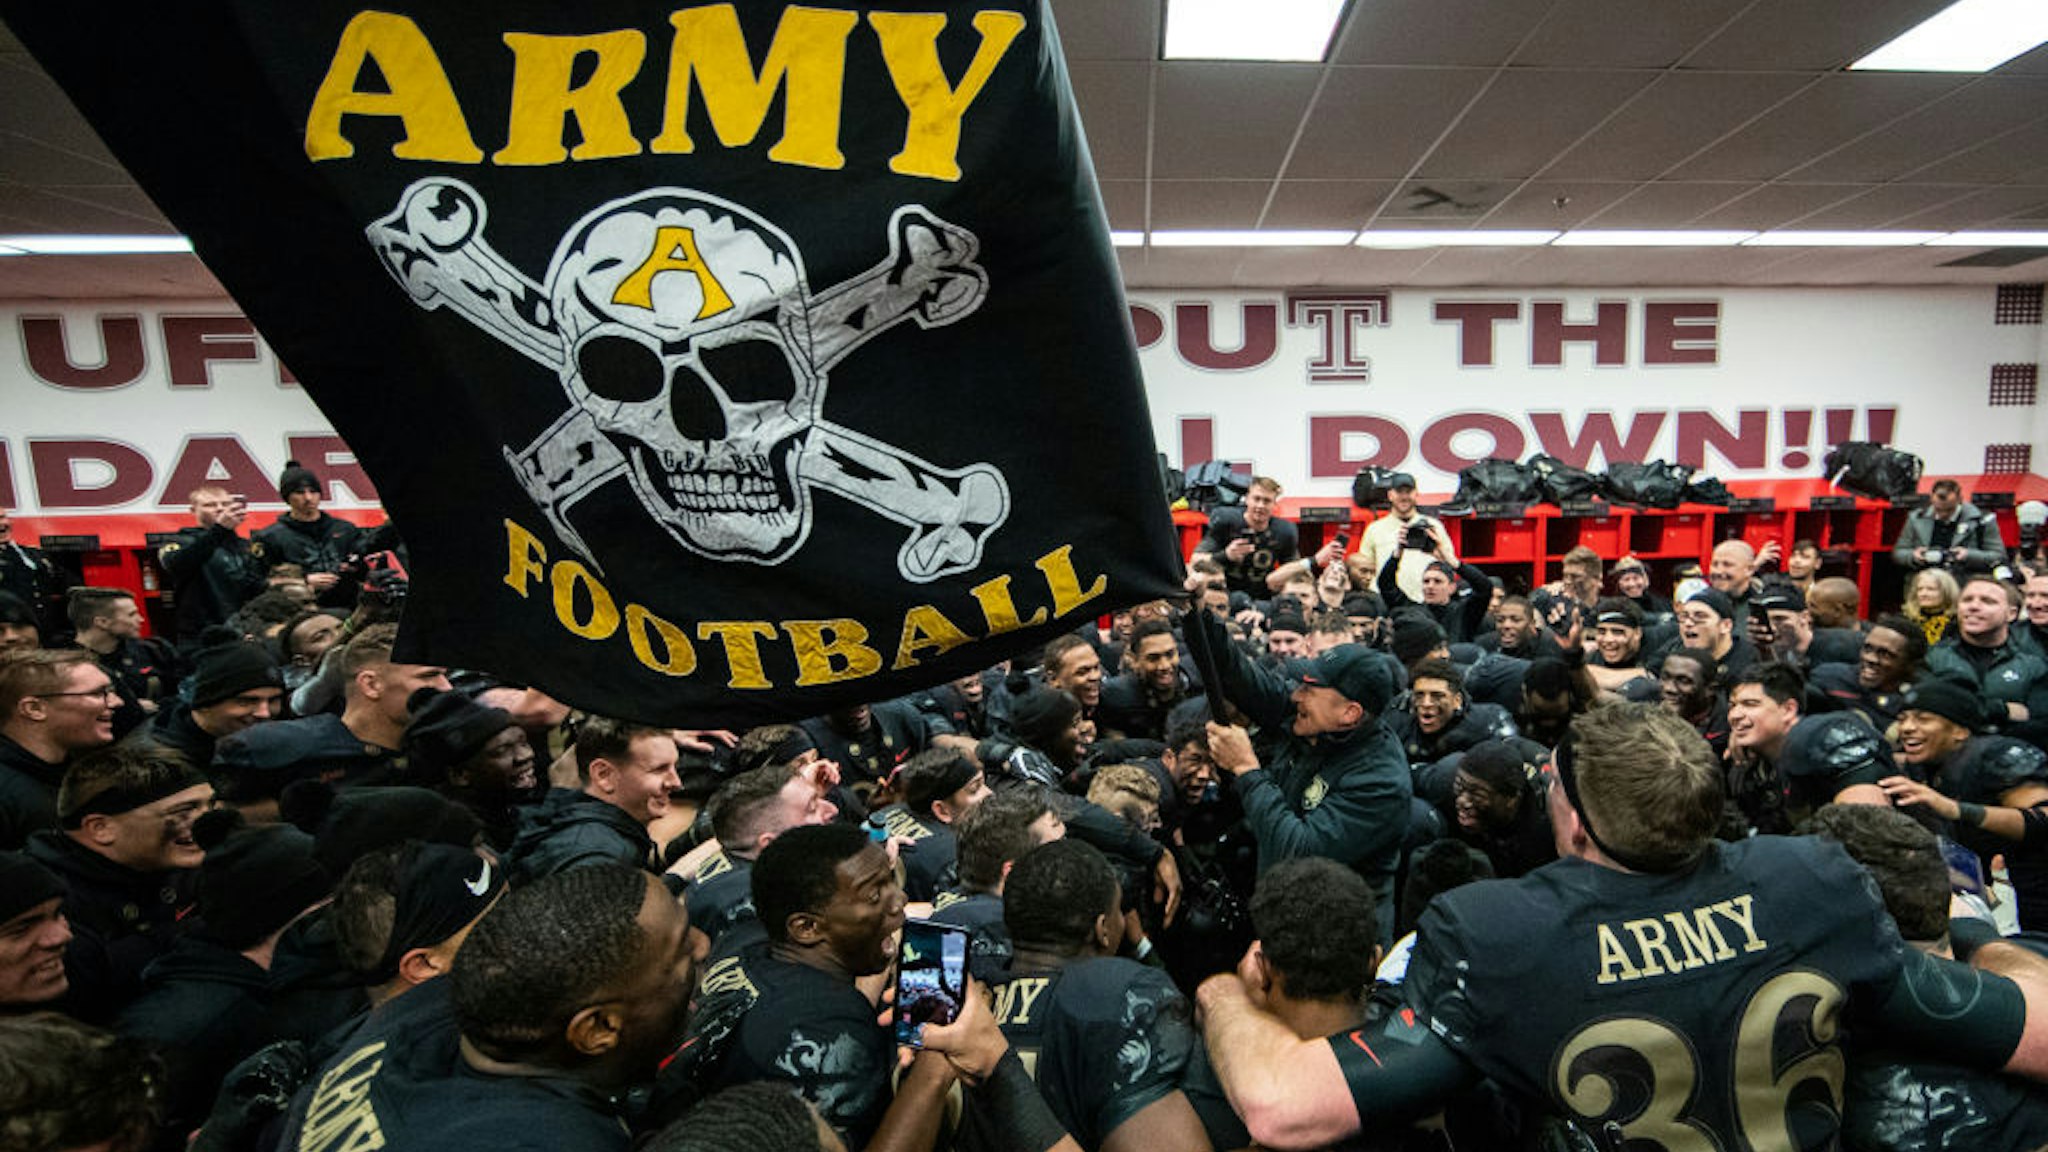 Jeff Monken, Head Coach of the Army Black Knights waves a flag in the locker room after defeating the Navy Midshipmen at Lincoln Financial Field on December 8, 2018 in Philadelphia, Pennsylvania. (Photo by Dustin Satloff/Getty Images)